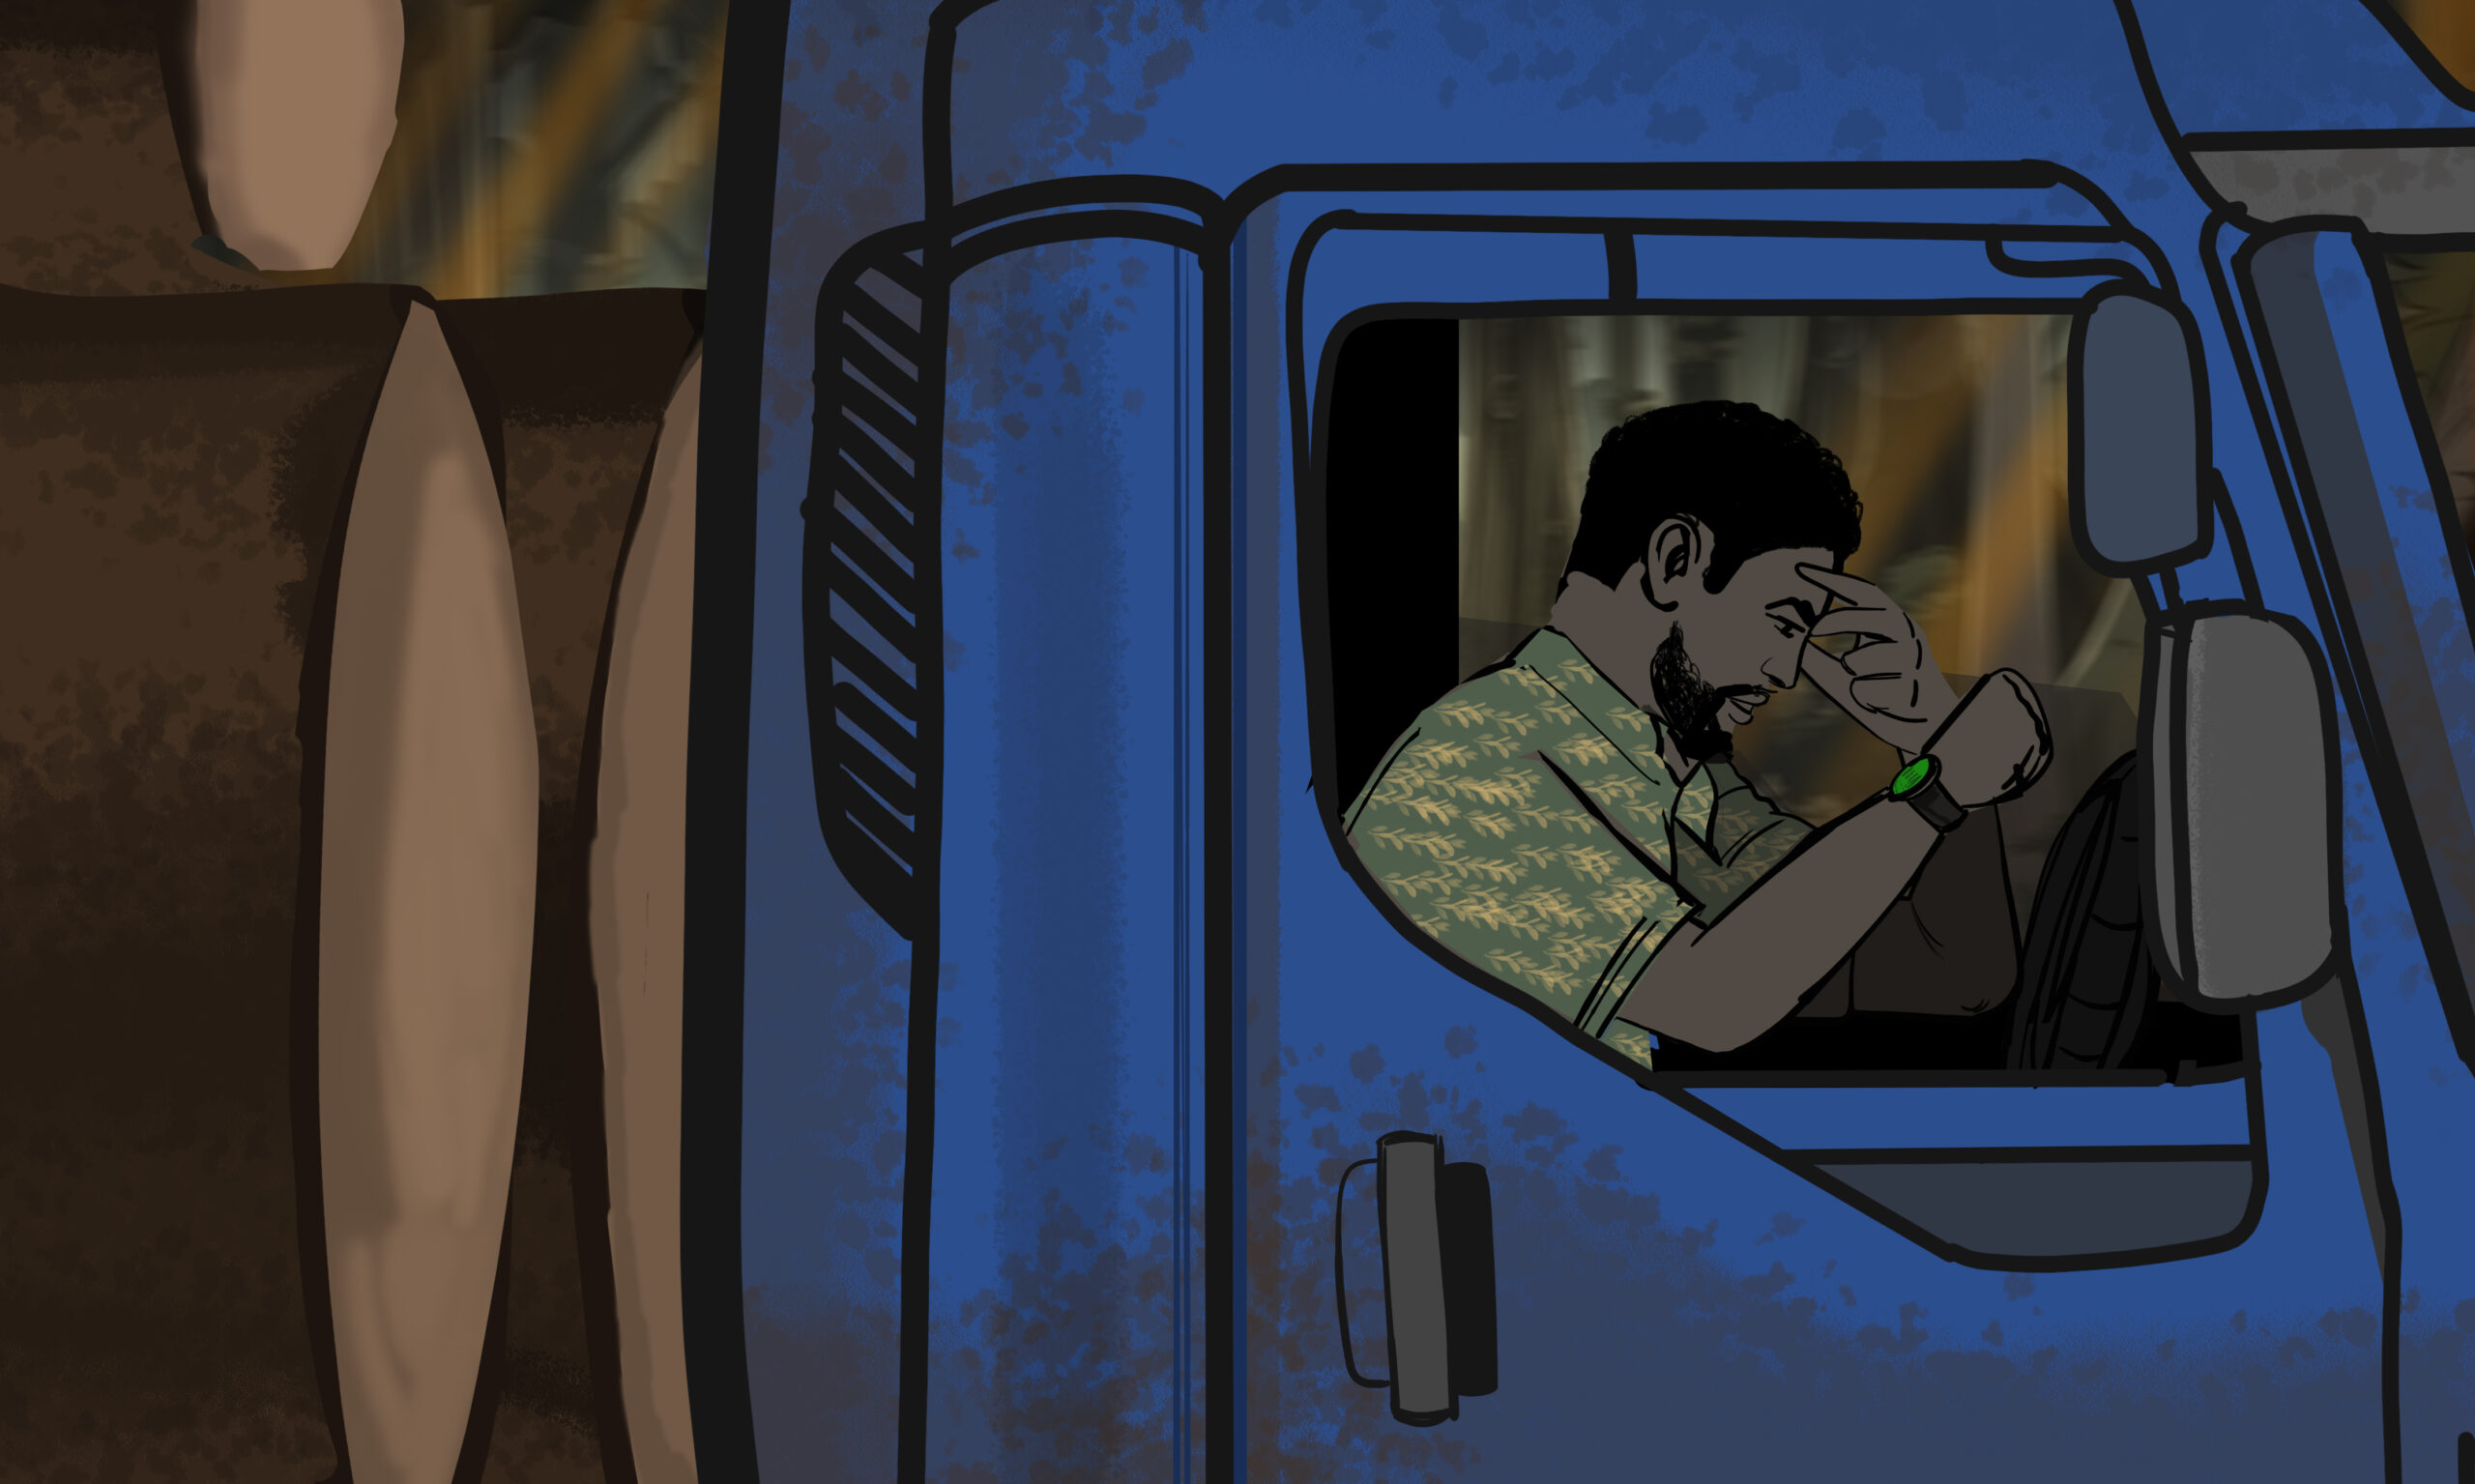 Truck driver transporting illegal logs, waiting for night to continue his journey. Illustration by InfoCongo